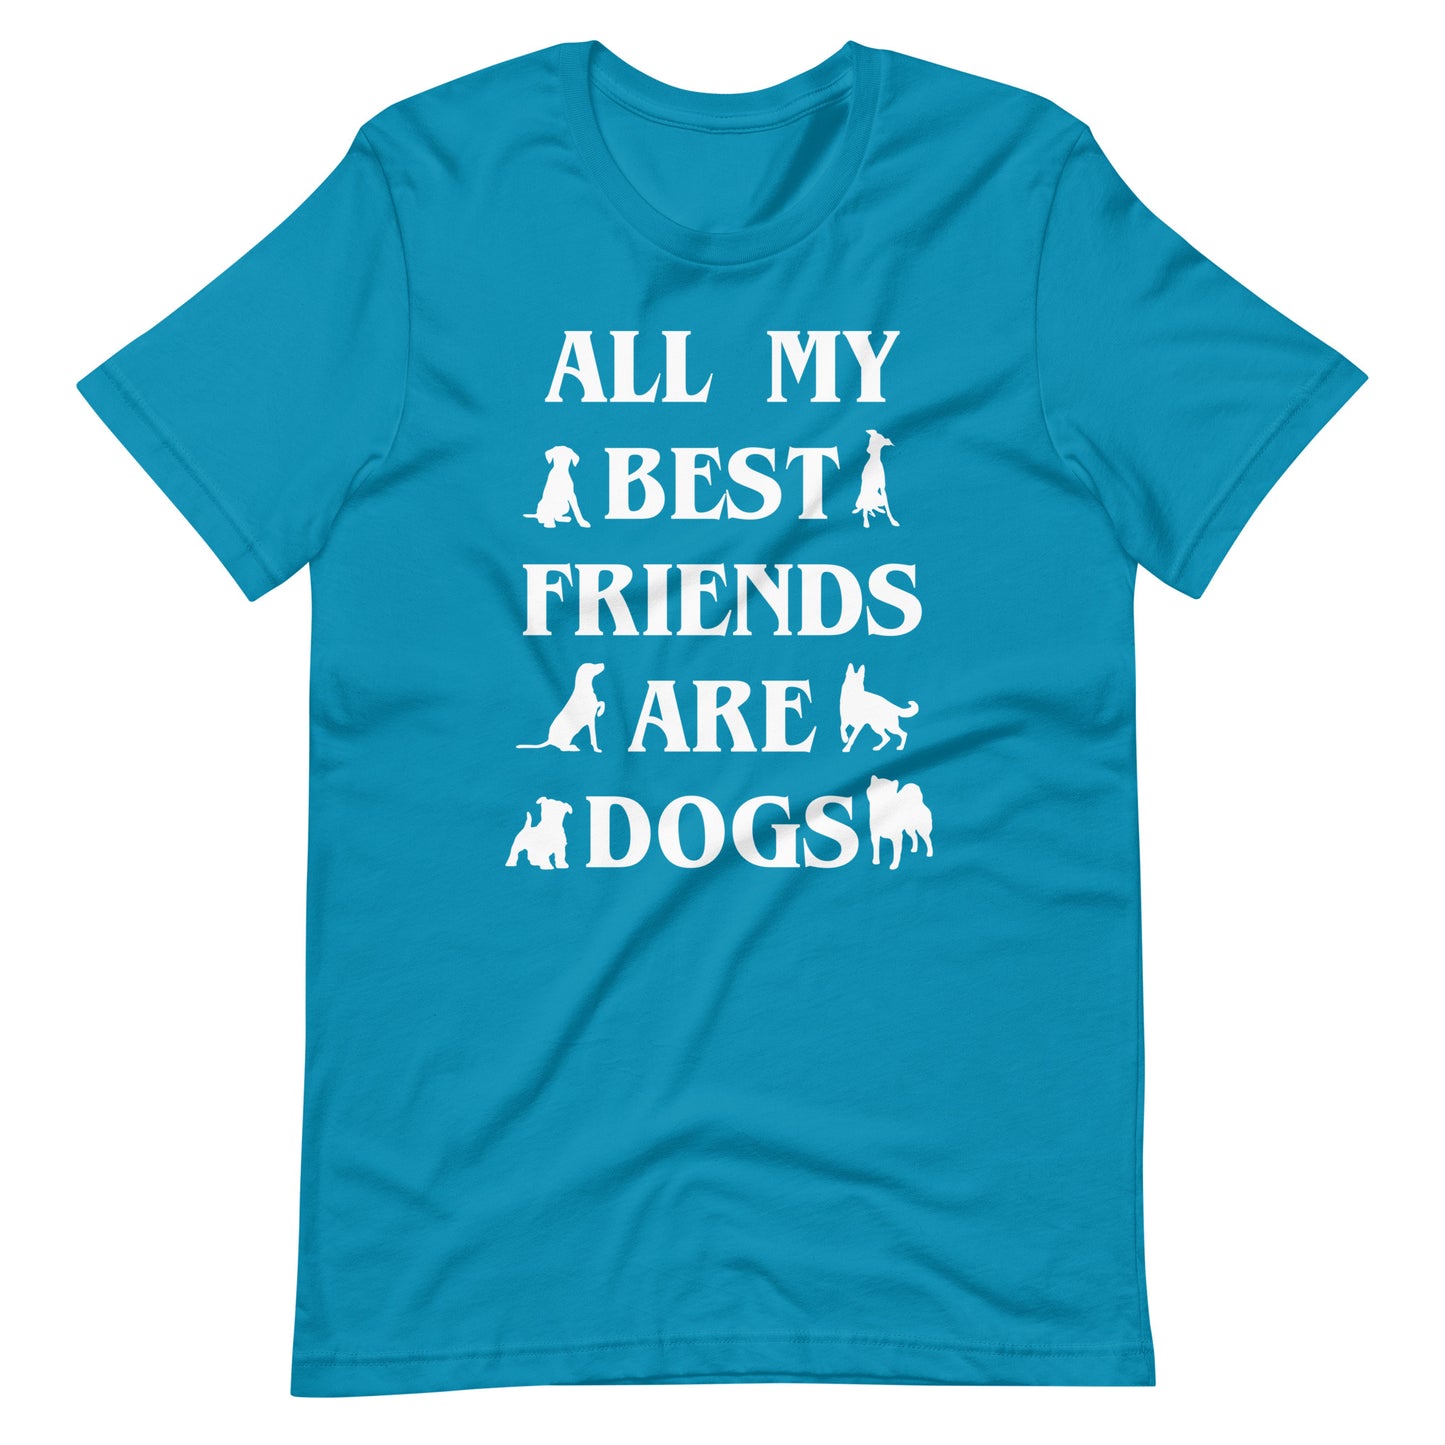 All My Best Friends are Dogs T-Shirt